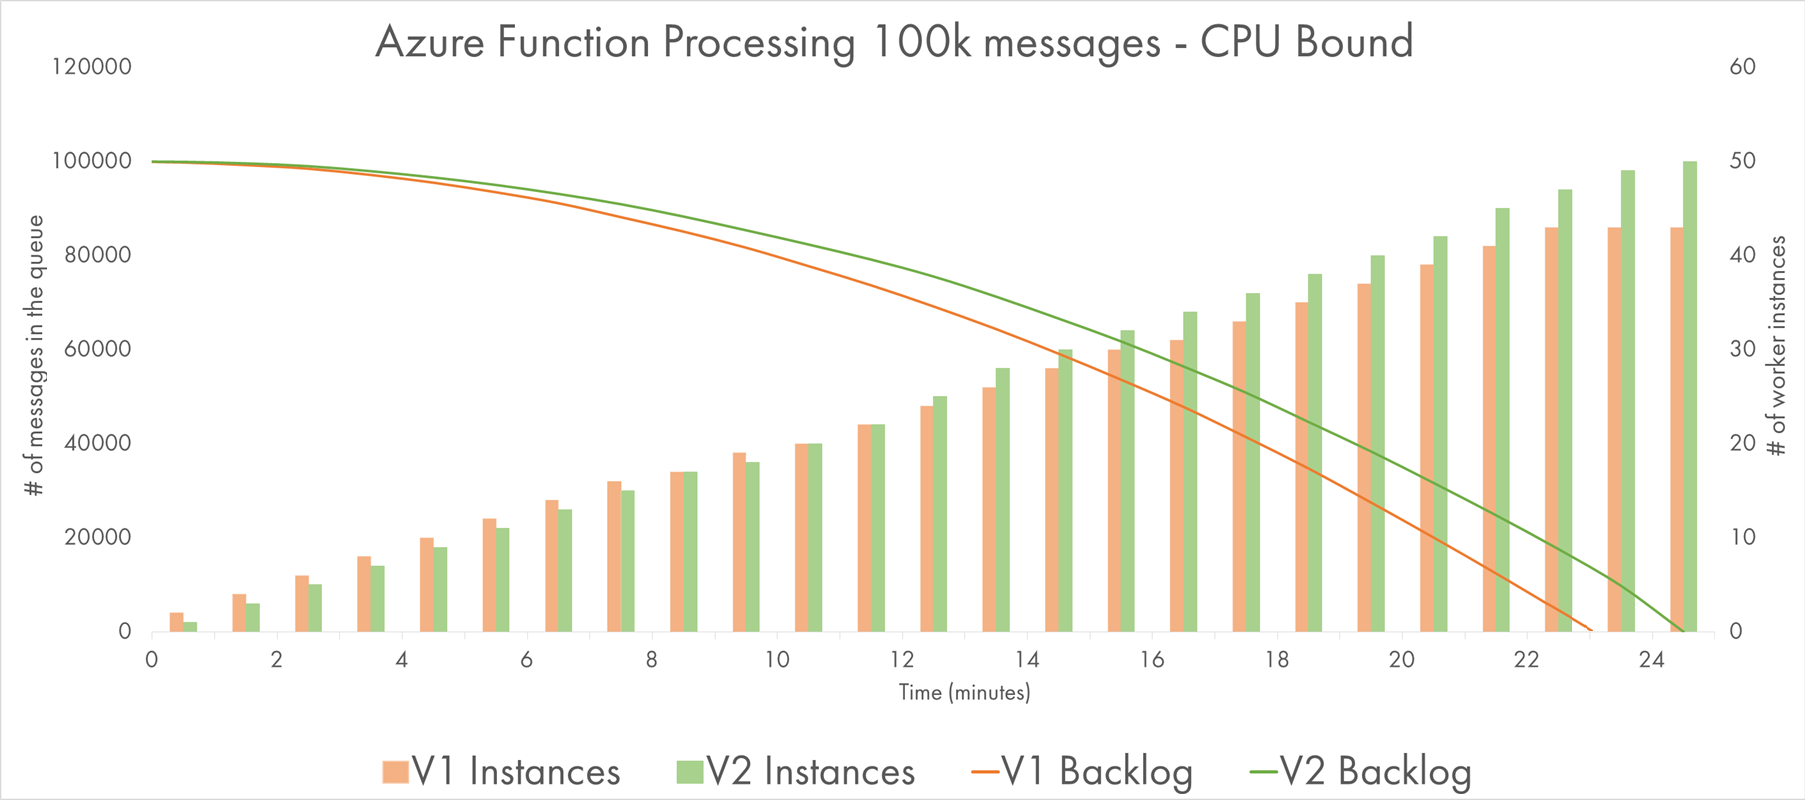 Processing Queue Messages with CPU-bound Workload